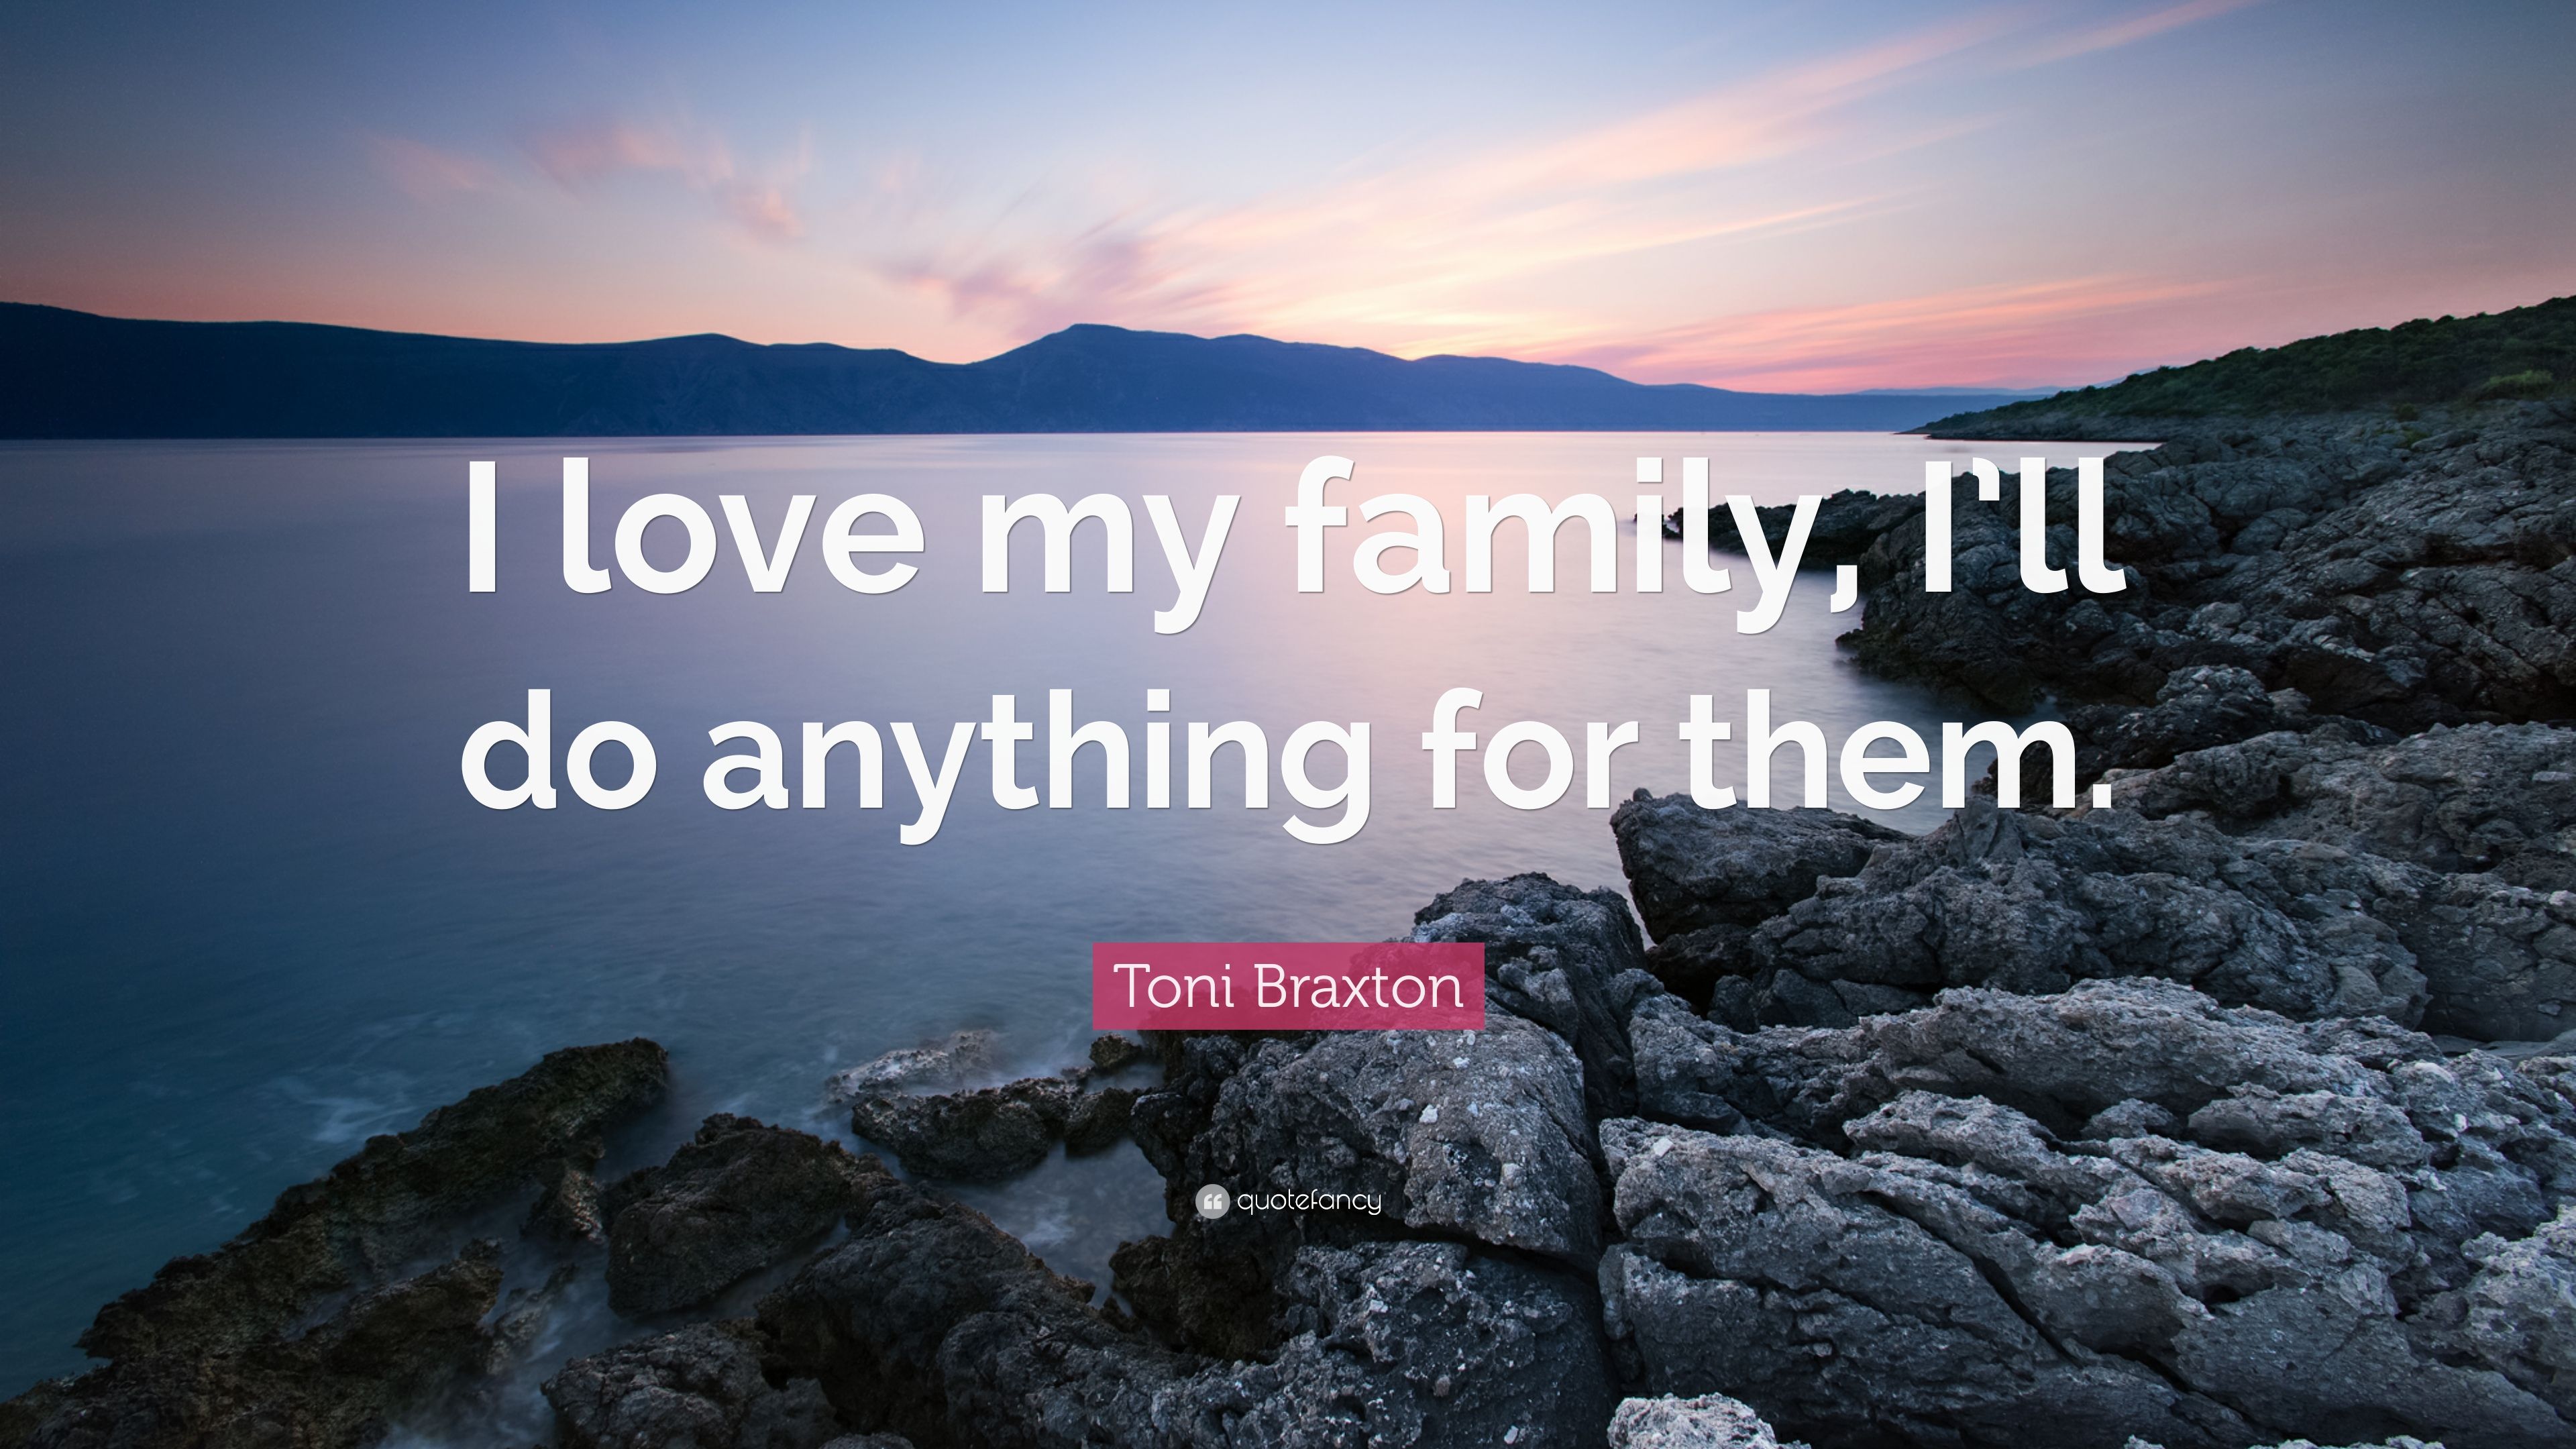 Toni Braxton Quote: “I love my family, I'll do anything for them.” (7 wallpaper)